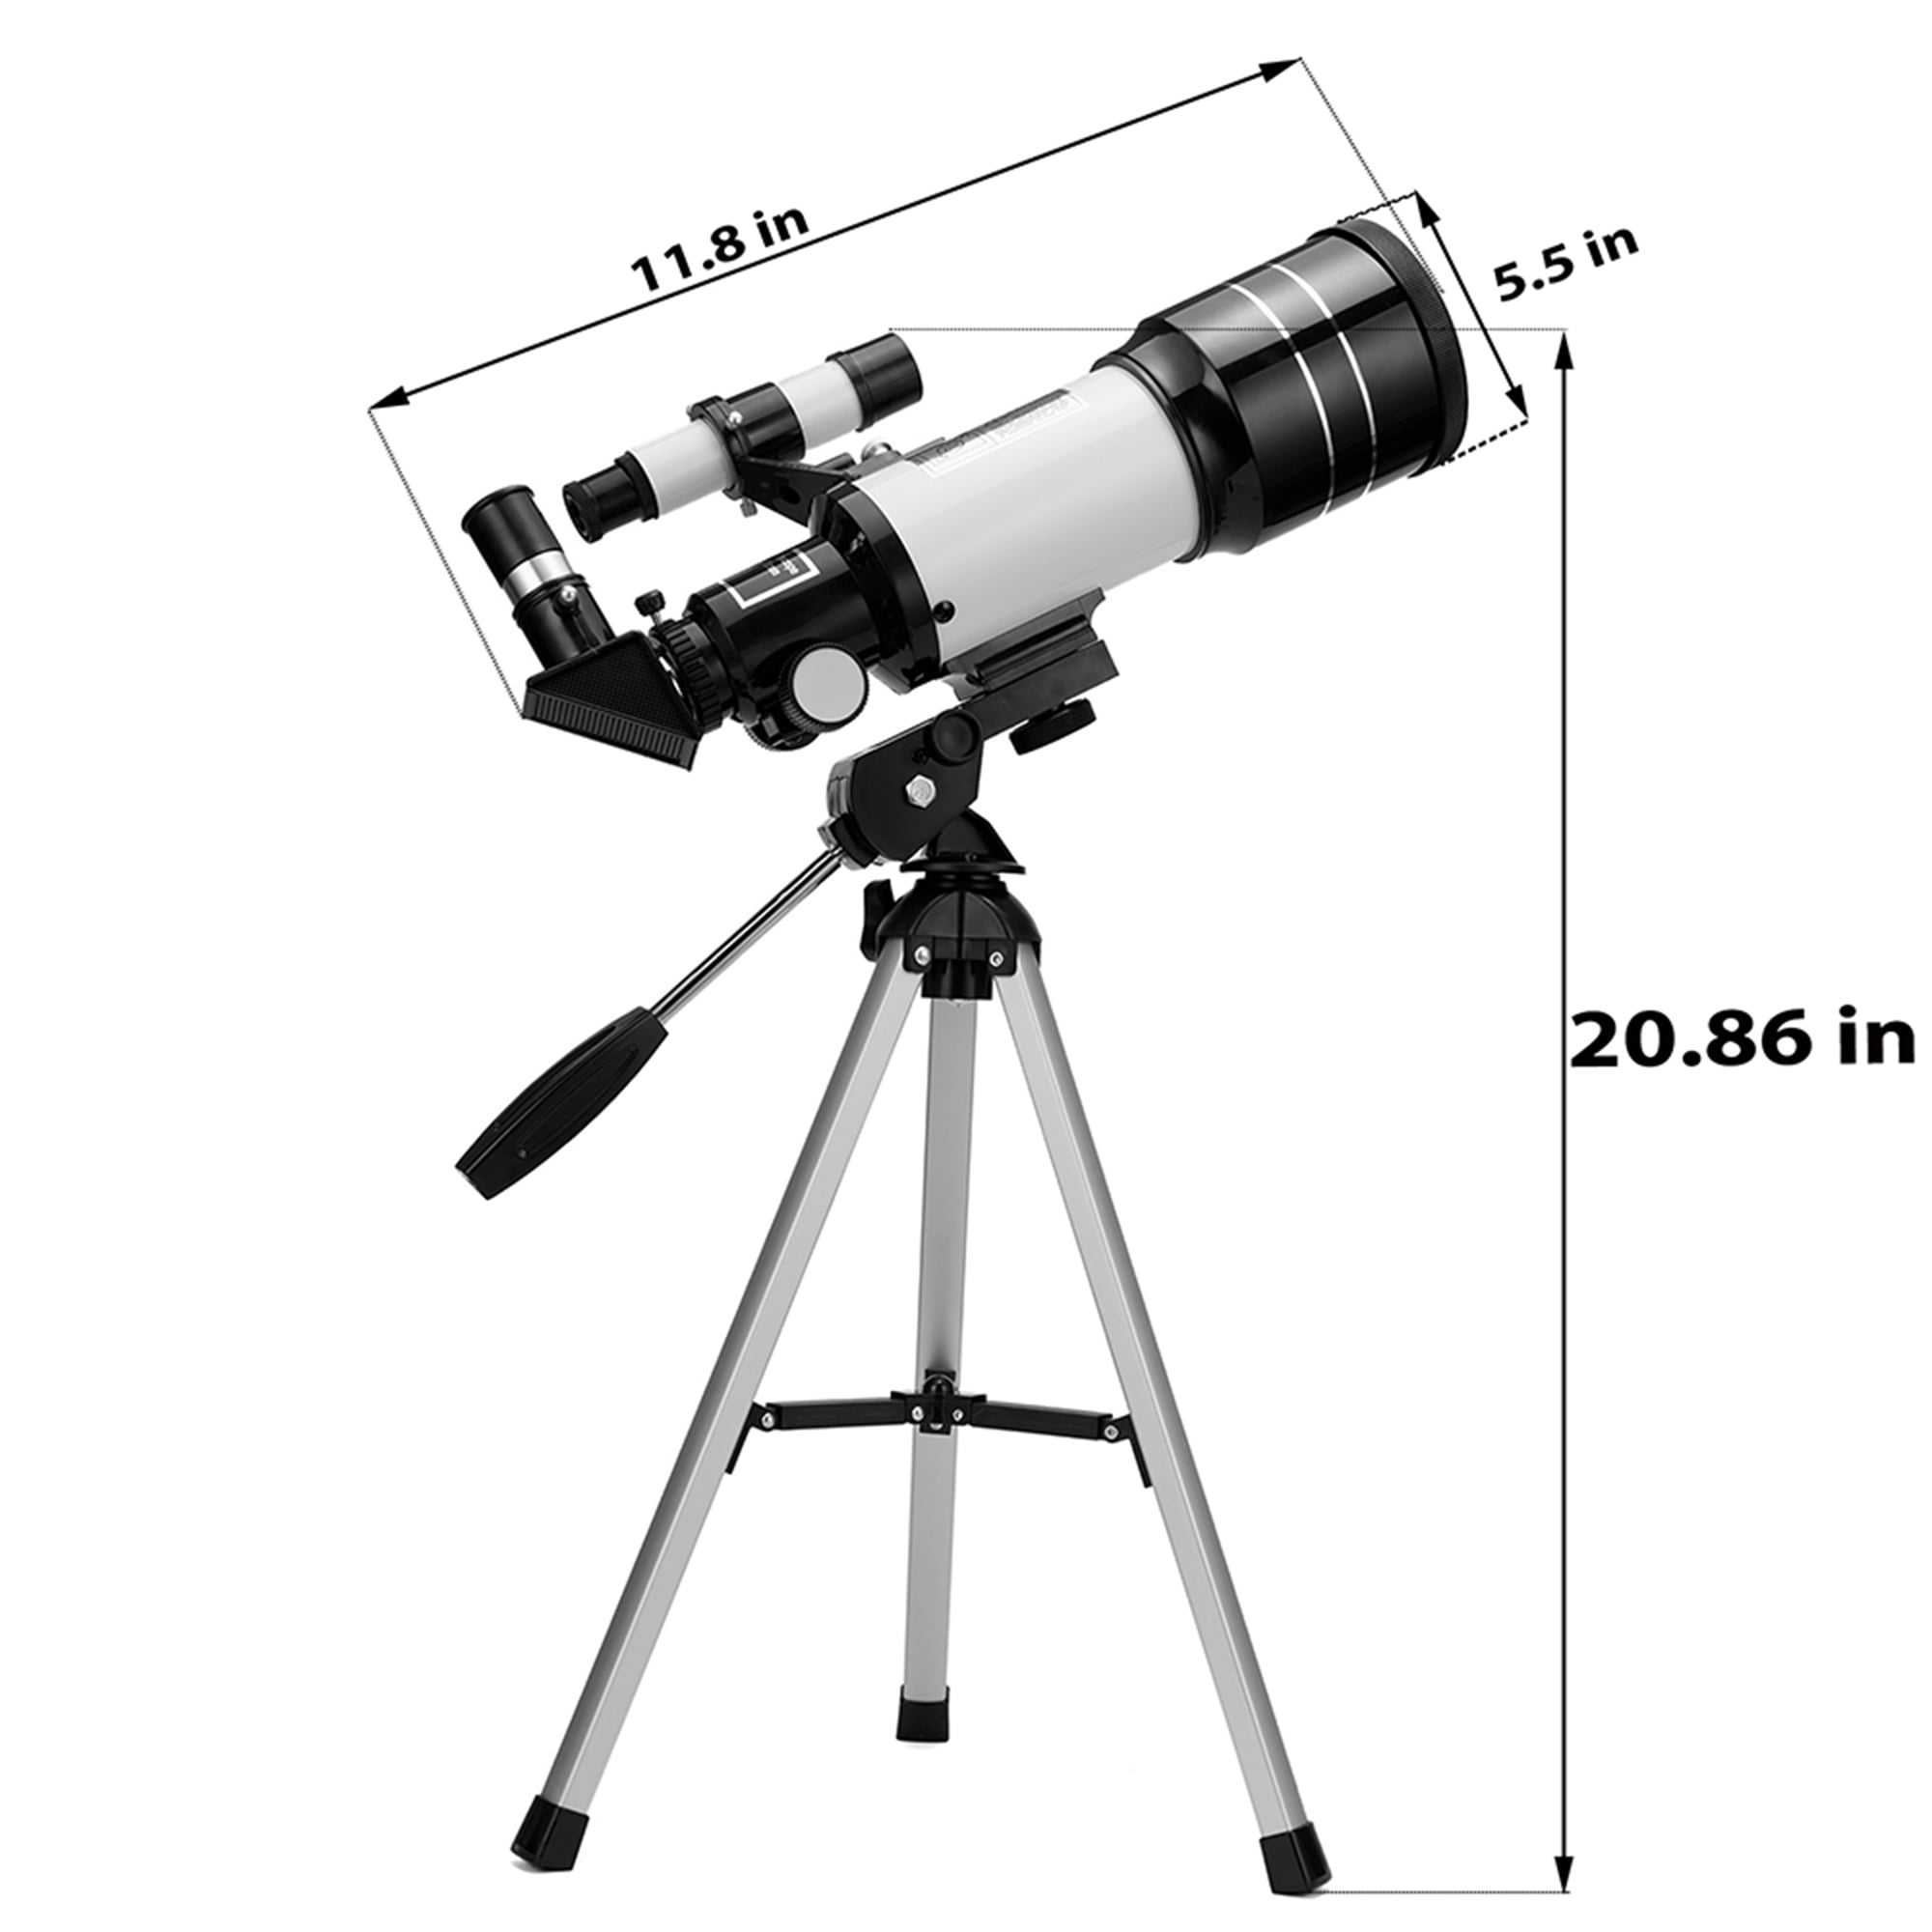 Astronomy Telescope for Adults Kids& Astronomy Beginners,Remi-Isle 70mm Wide-Angle Refractor Telescope with Tripod,Astronomical Refractor Telescope to Observe Moon Planet As Shown 